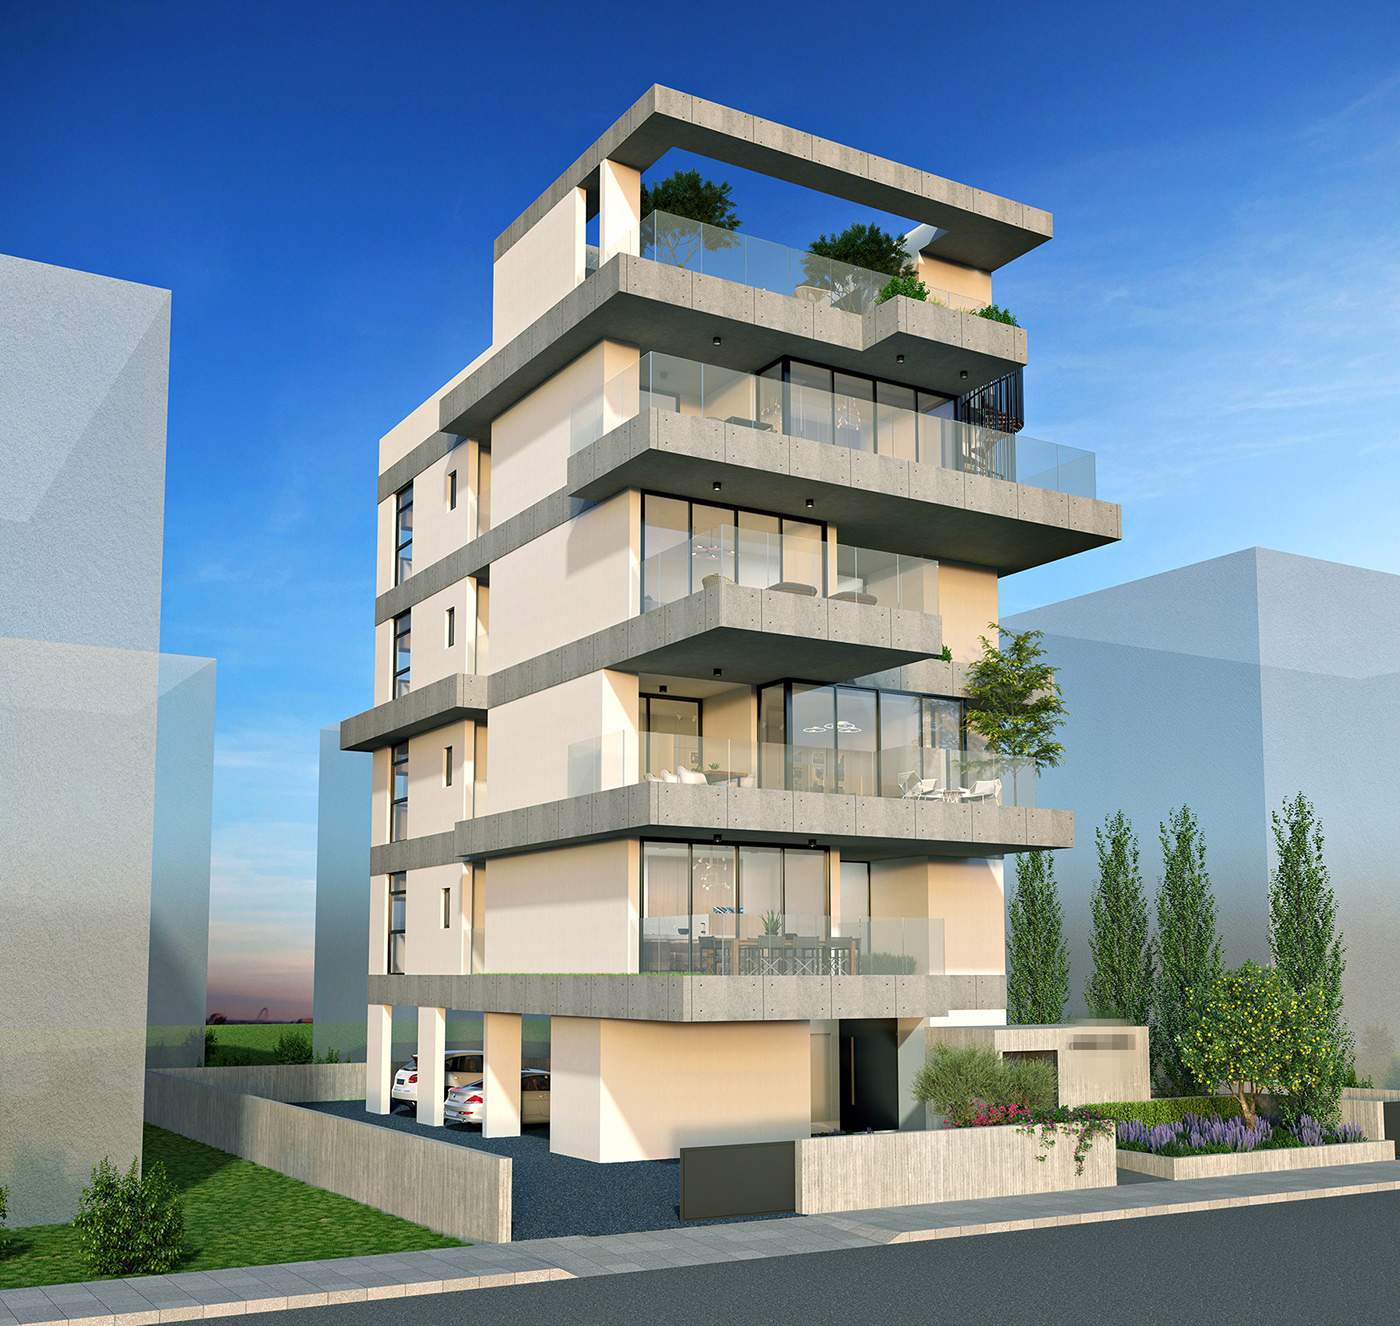 apartment business Buy Apartment cyprus real estate limassol Limassol properties property real estate seaside apartments Whole floor flats